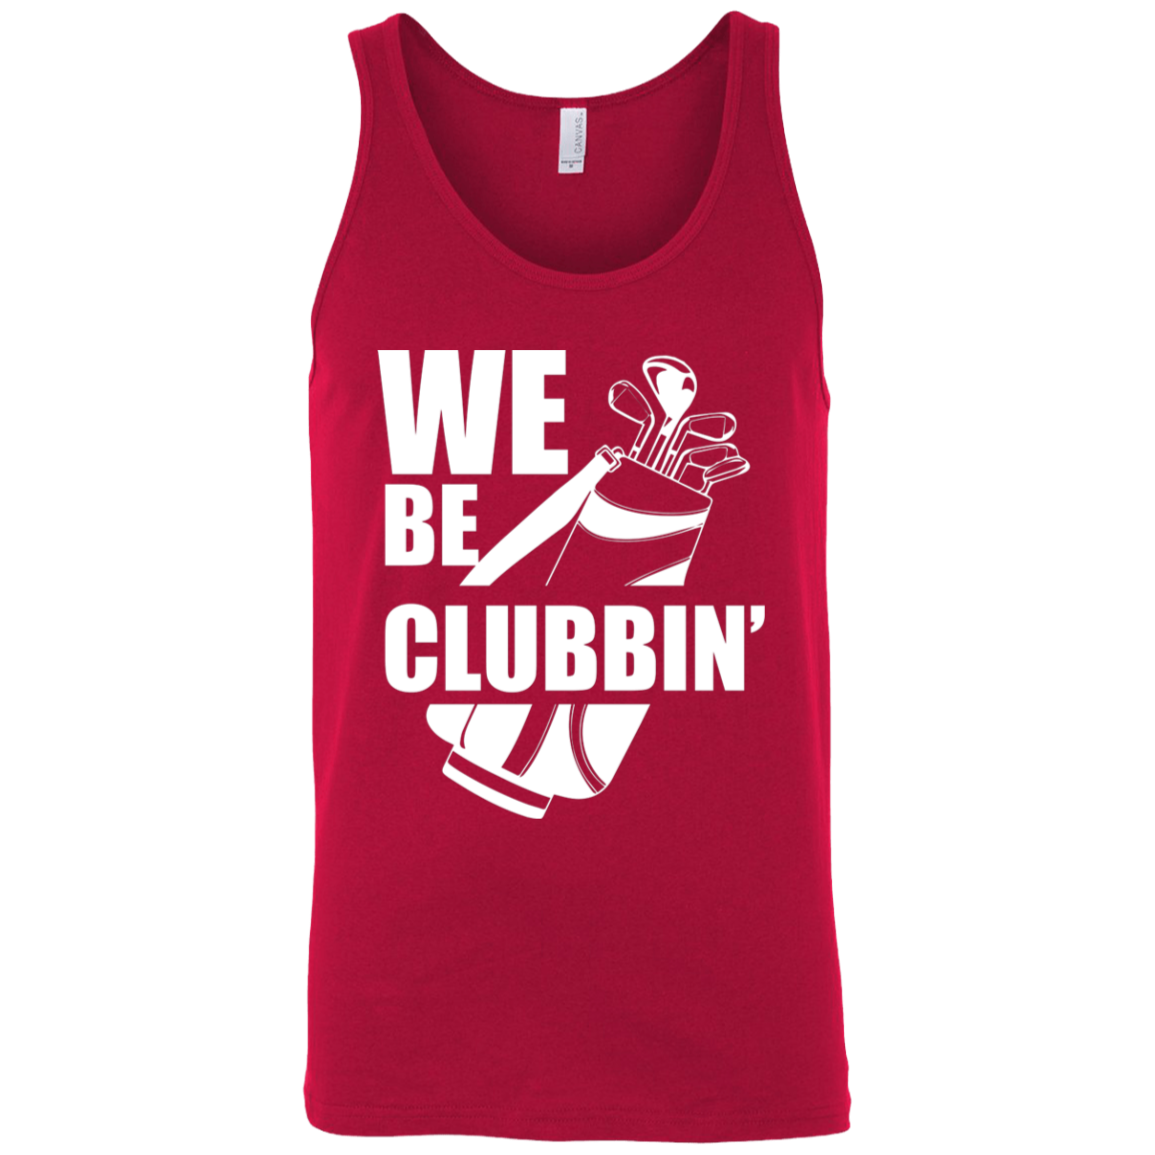 We Be Clubbin' Tank Top Apparel - The Beer Lodge